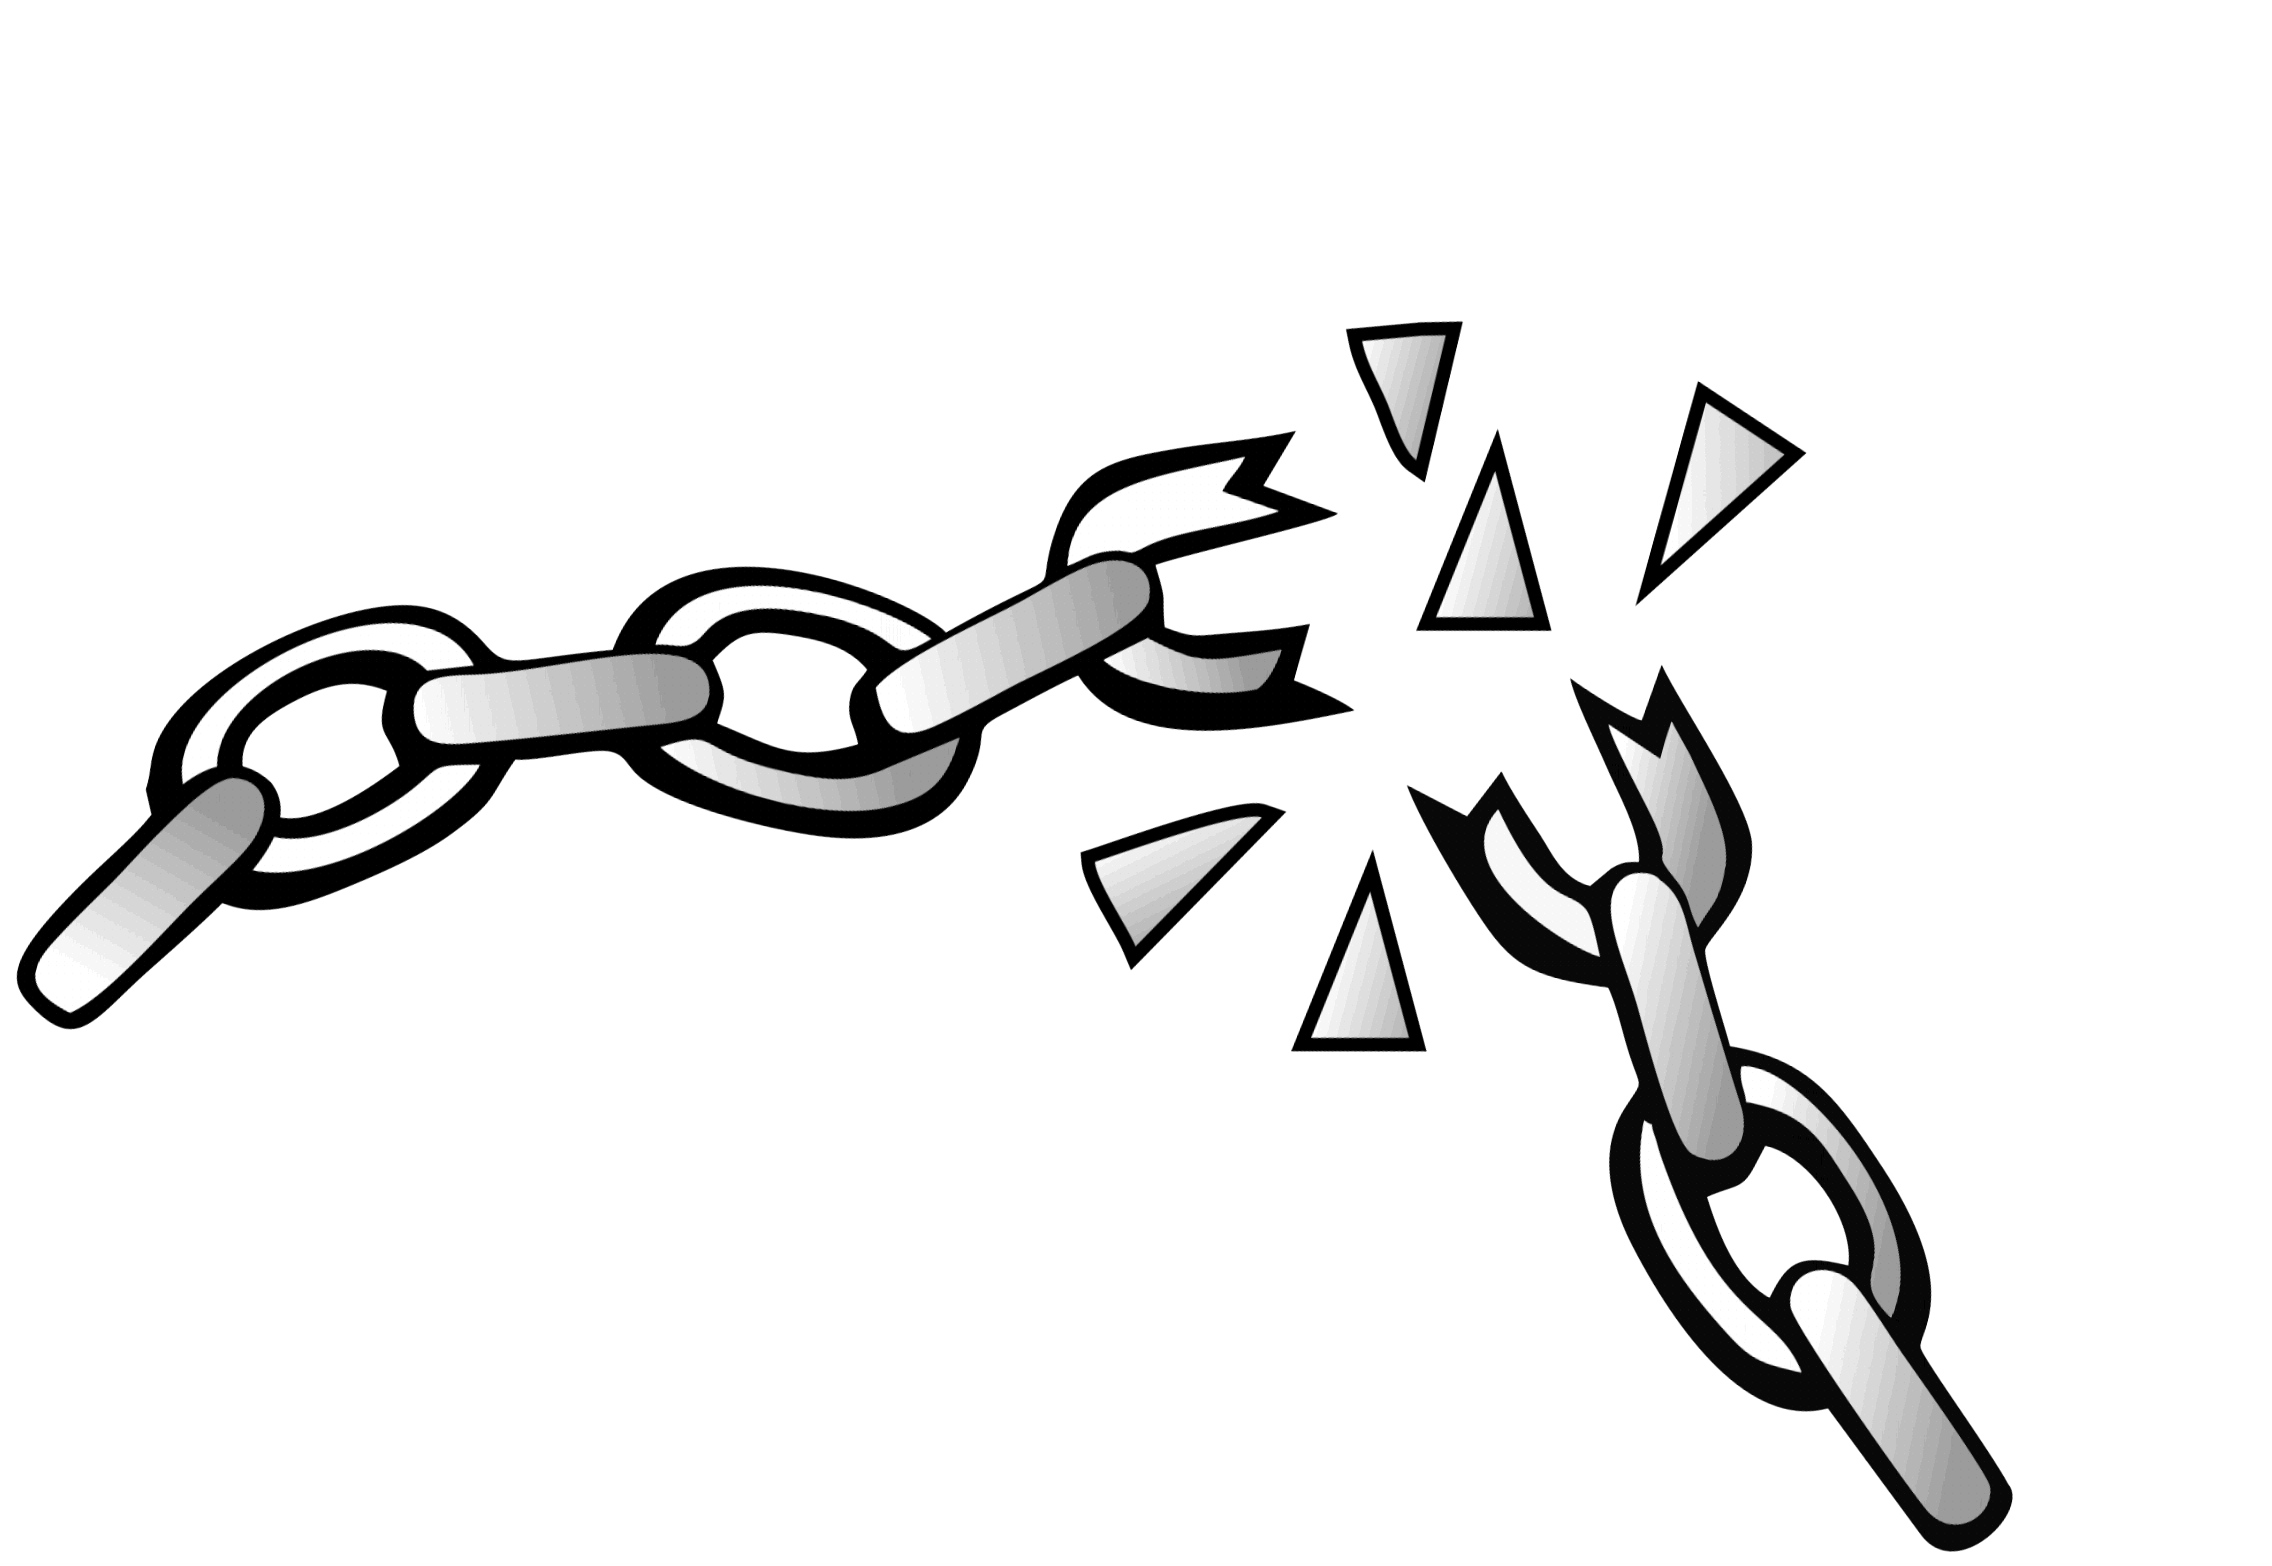 chain clipart drawing